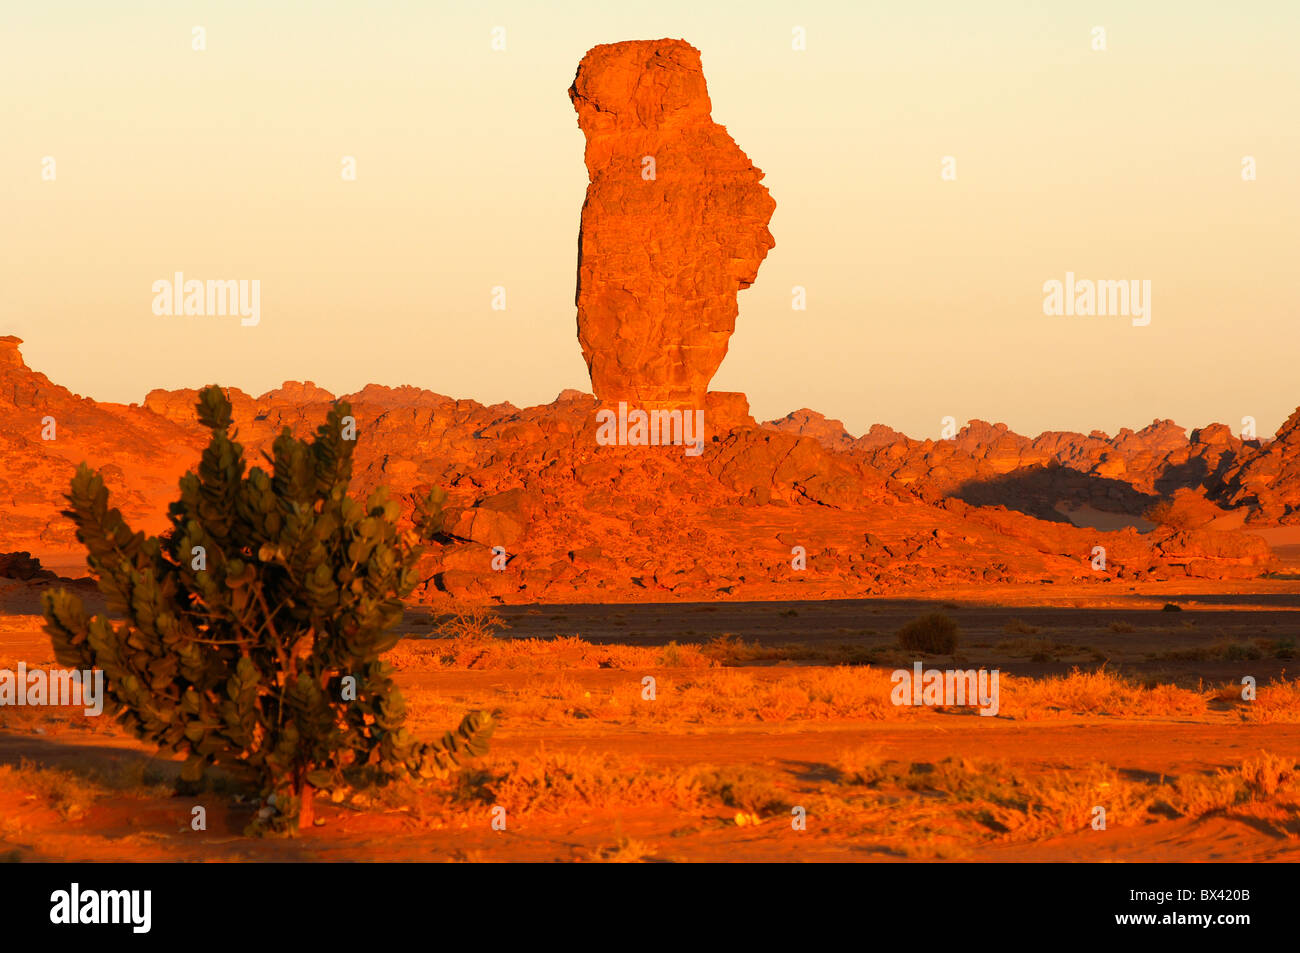 Morning light on bizarre rock formations in the Acacus mountains, Libya Stock Photo